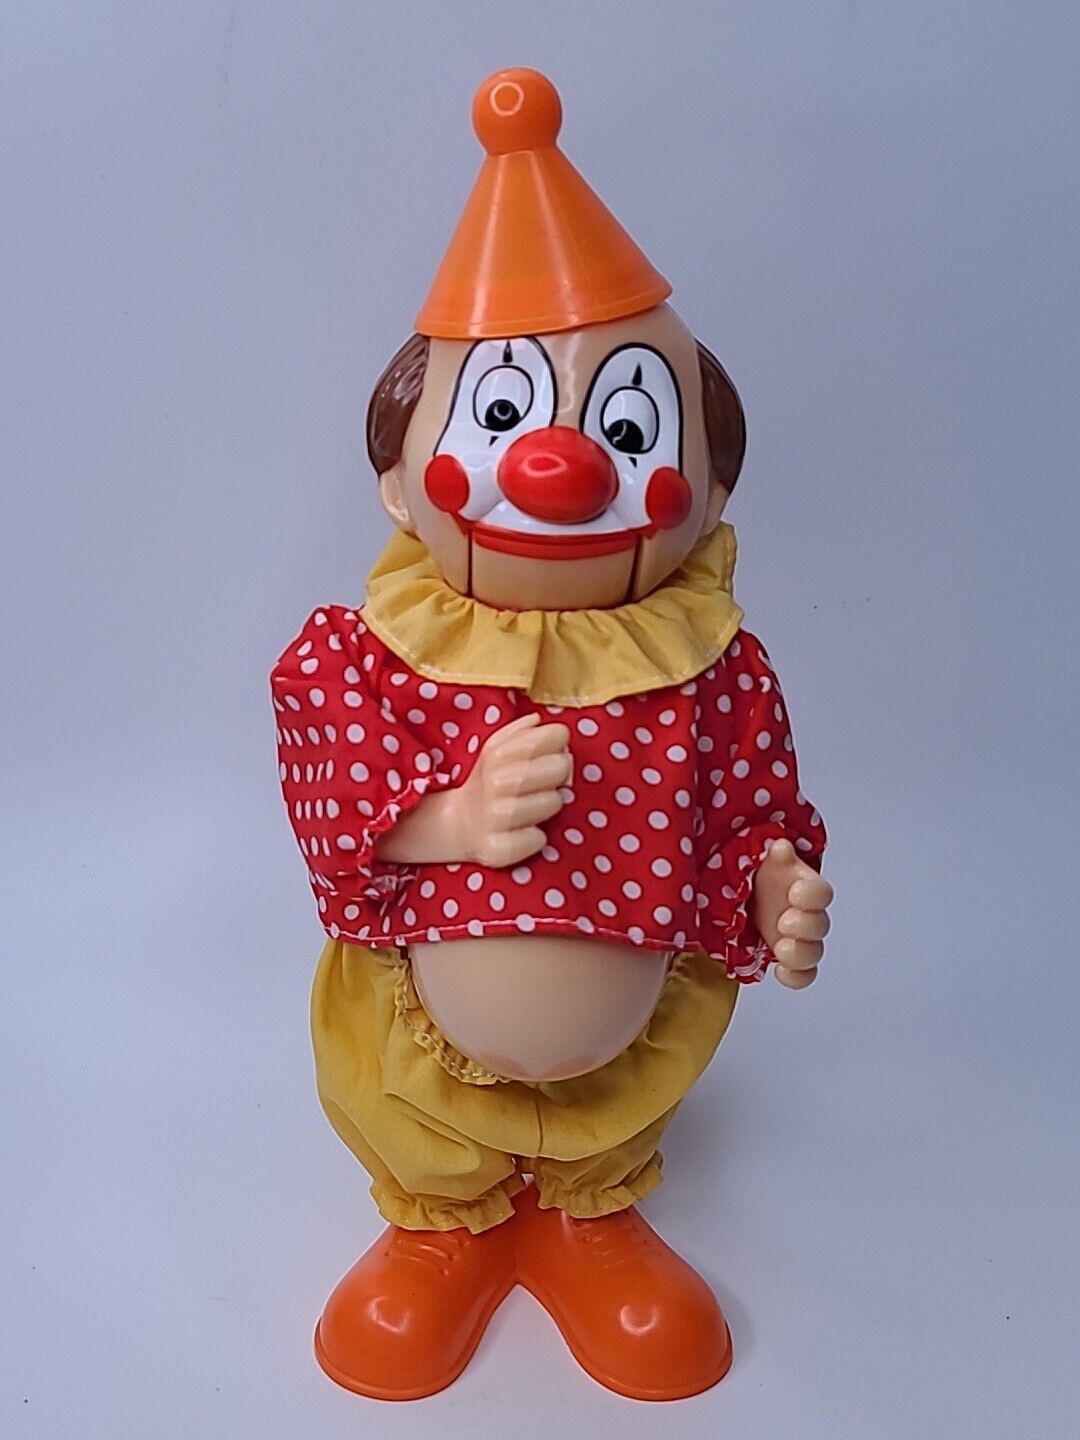 Vintage Mechanical Plastic Clown Coin Bank - 10 3/4 Inches